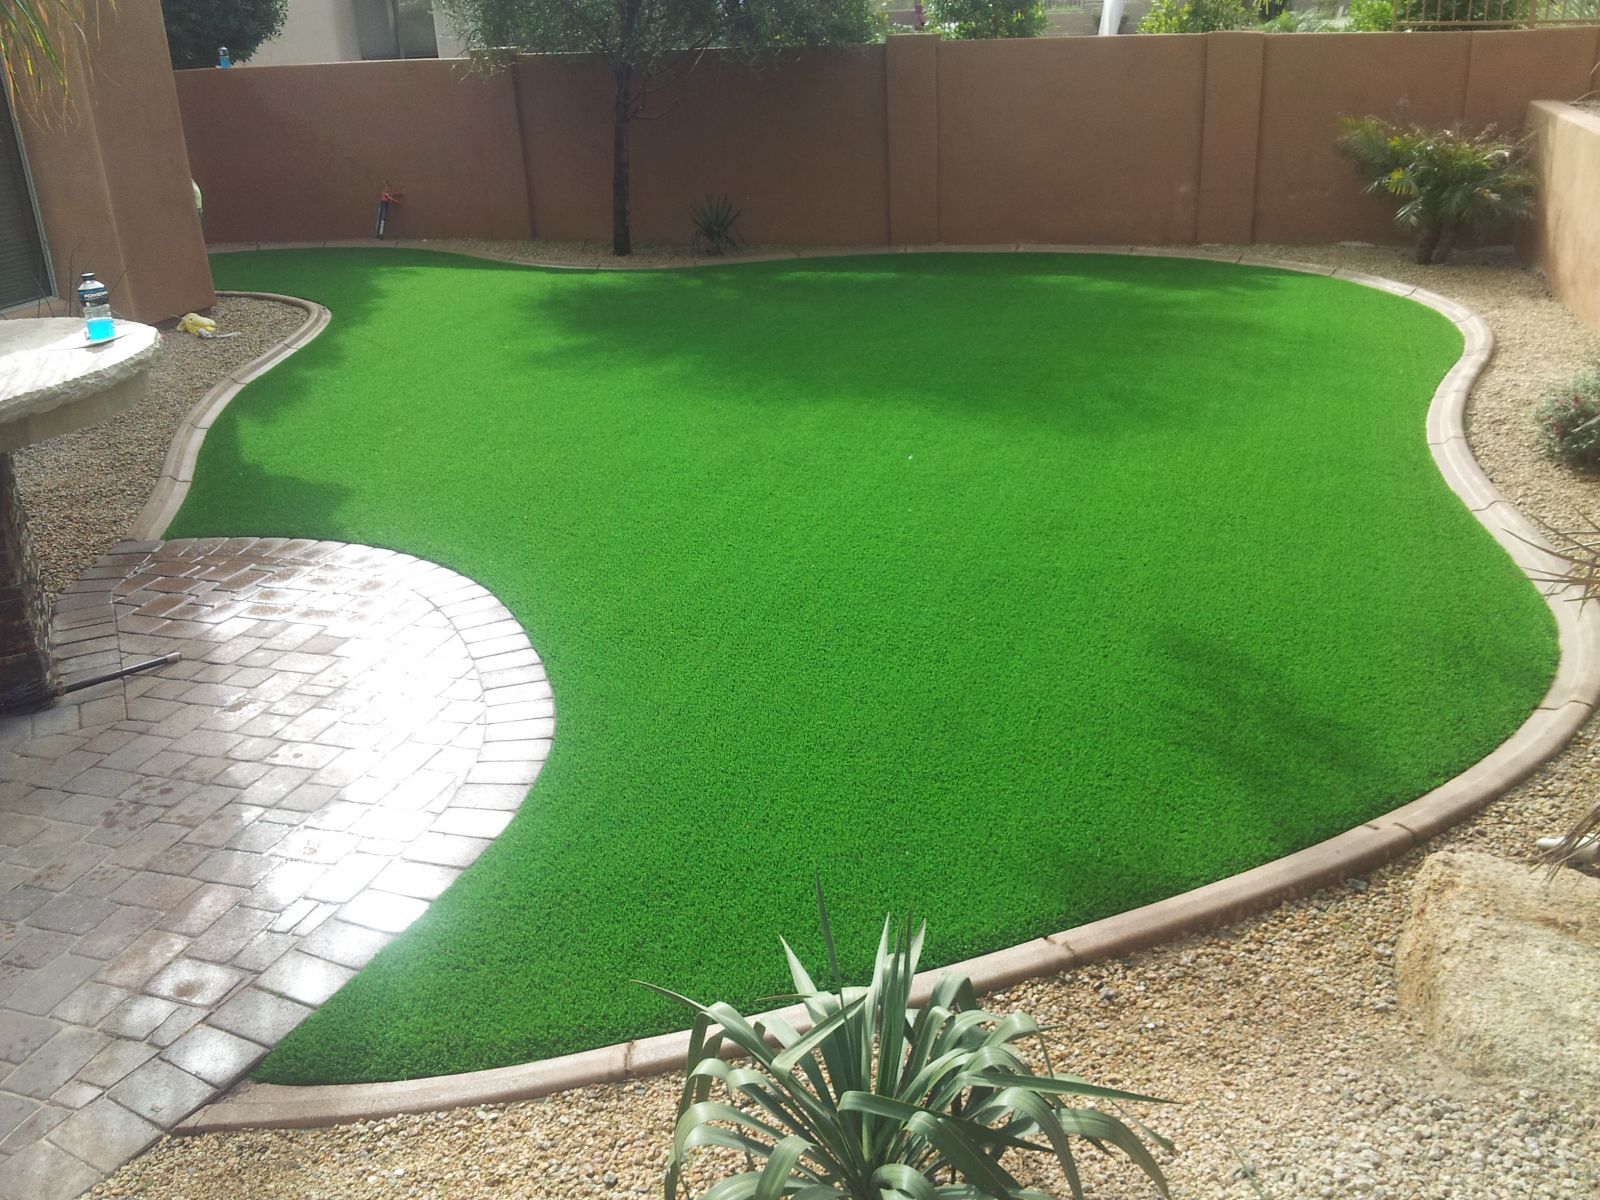 Fake Grass & Pool Comfort. Paradise Valley Artificial Turf